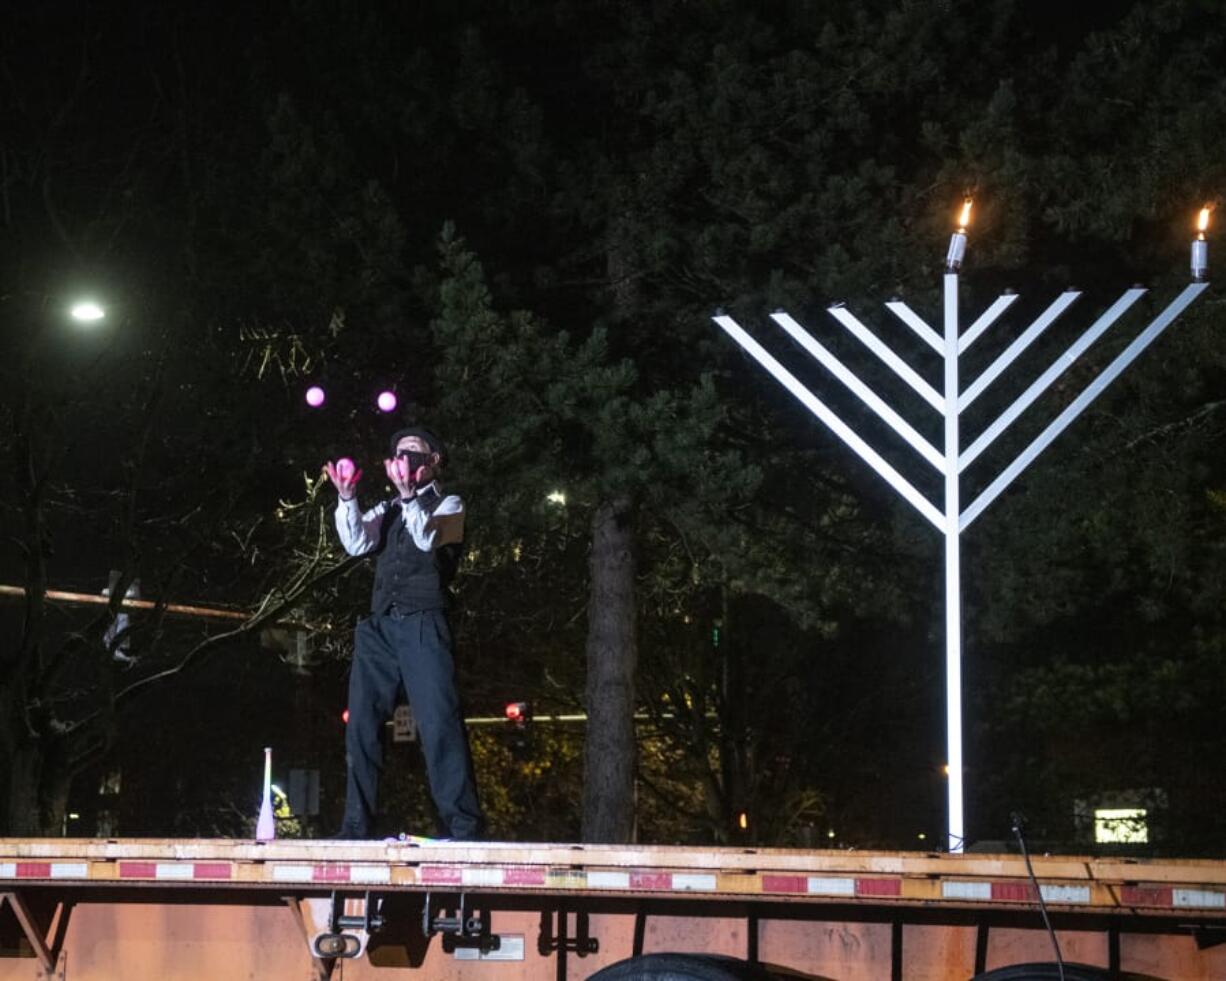 A performer from Circus Luminescence juggles in front of an audience at a drive-in menorah lighting Thursday night in a parking lot across the street from the Clark County Historical Museum.